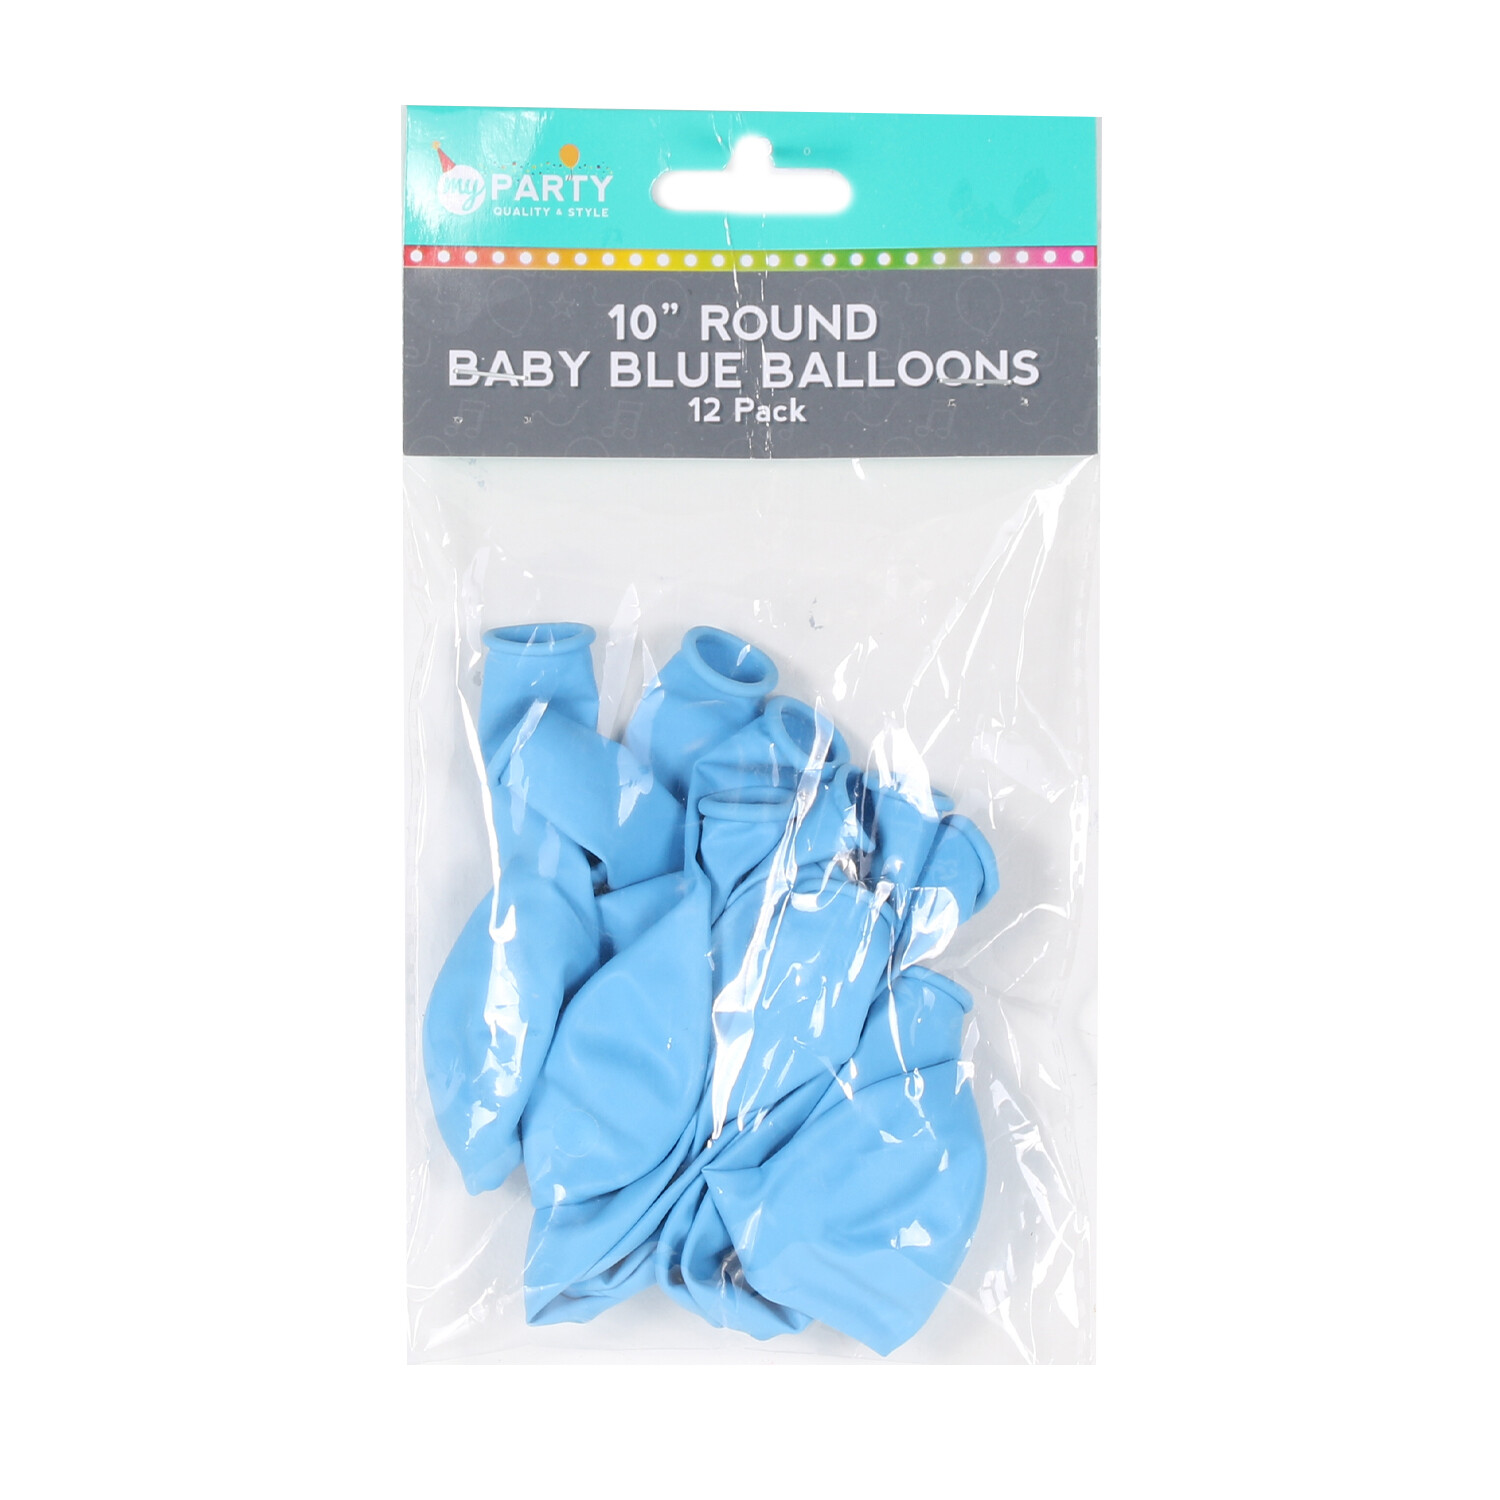 Pack of 12 10" Round Baby Balloons - Blue Image